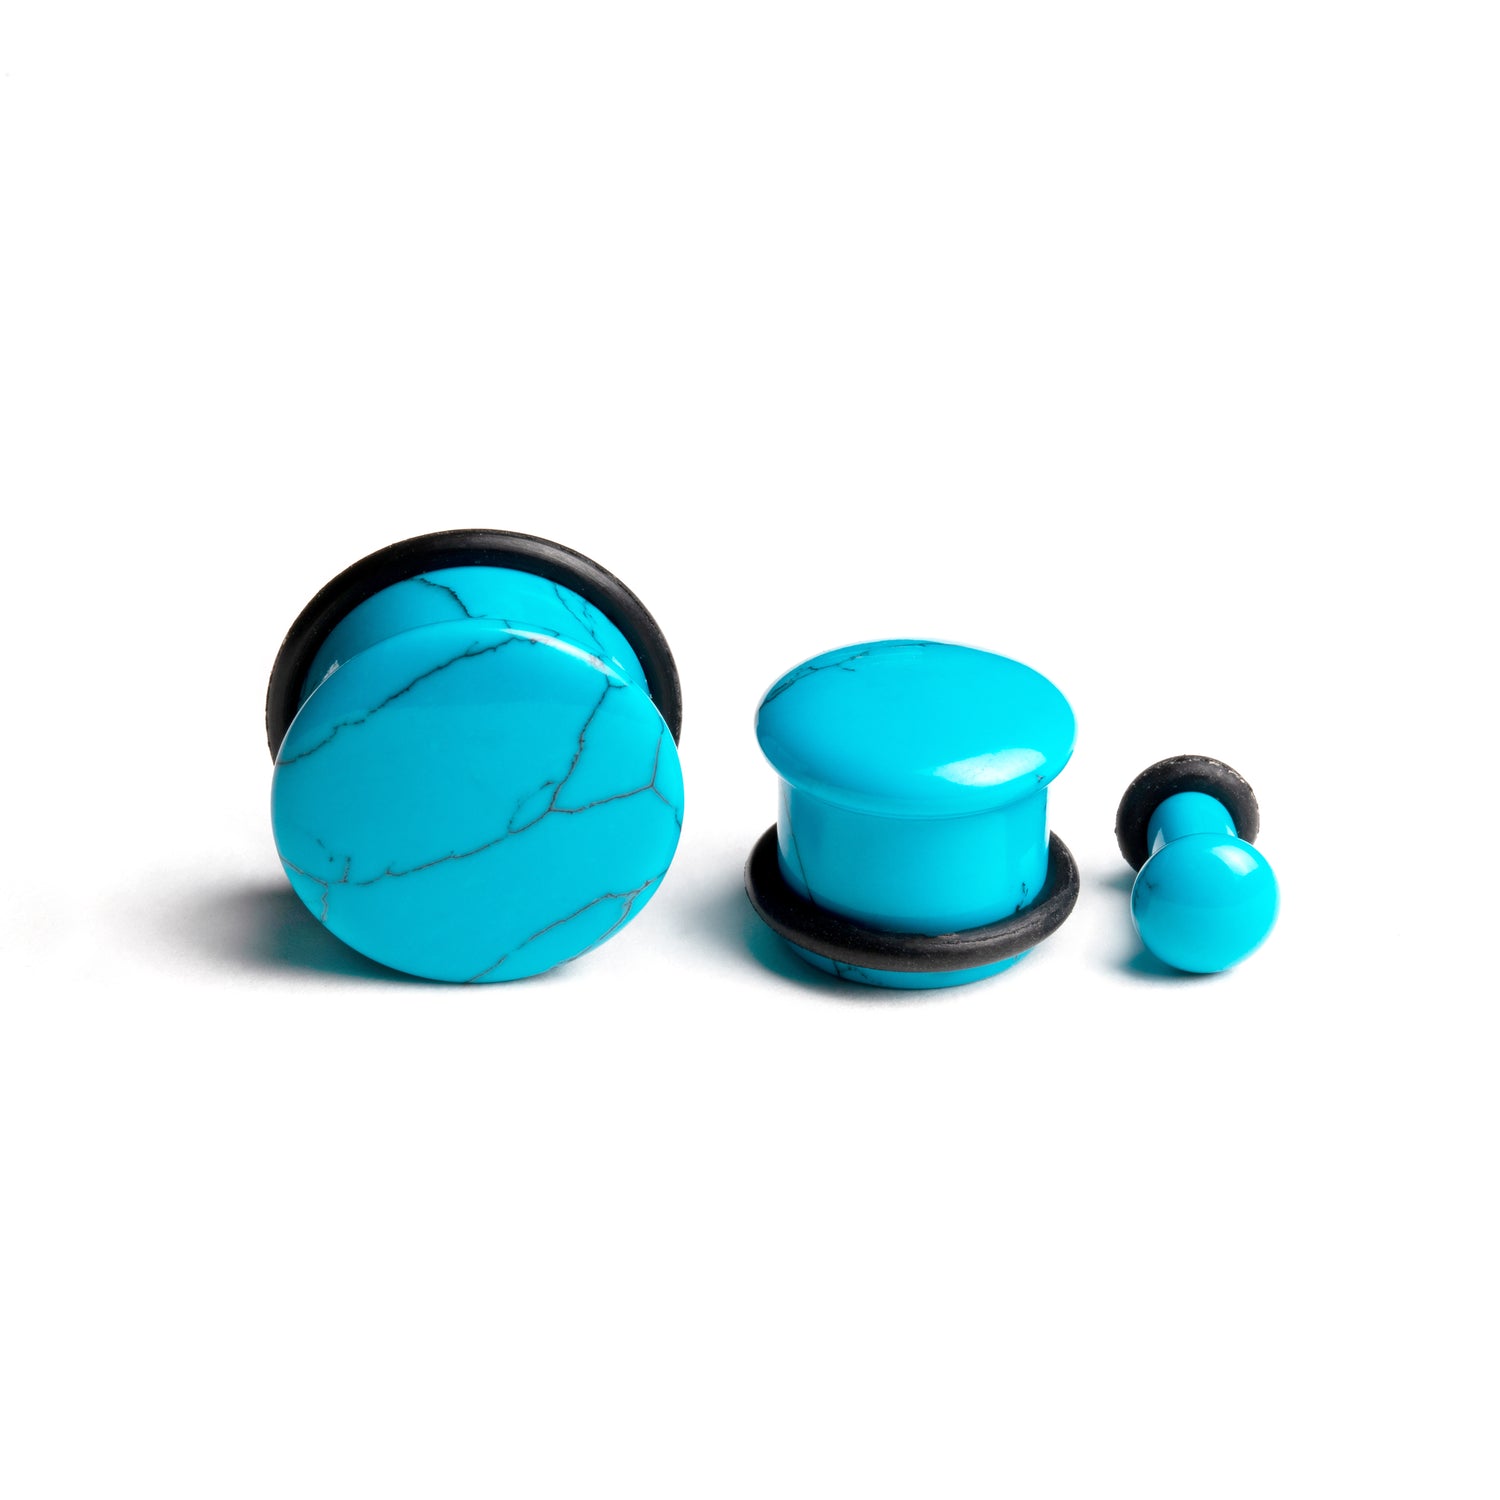 several sizes of flared Turquoise stone ear plugs side and front view